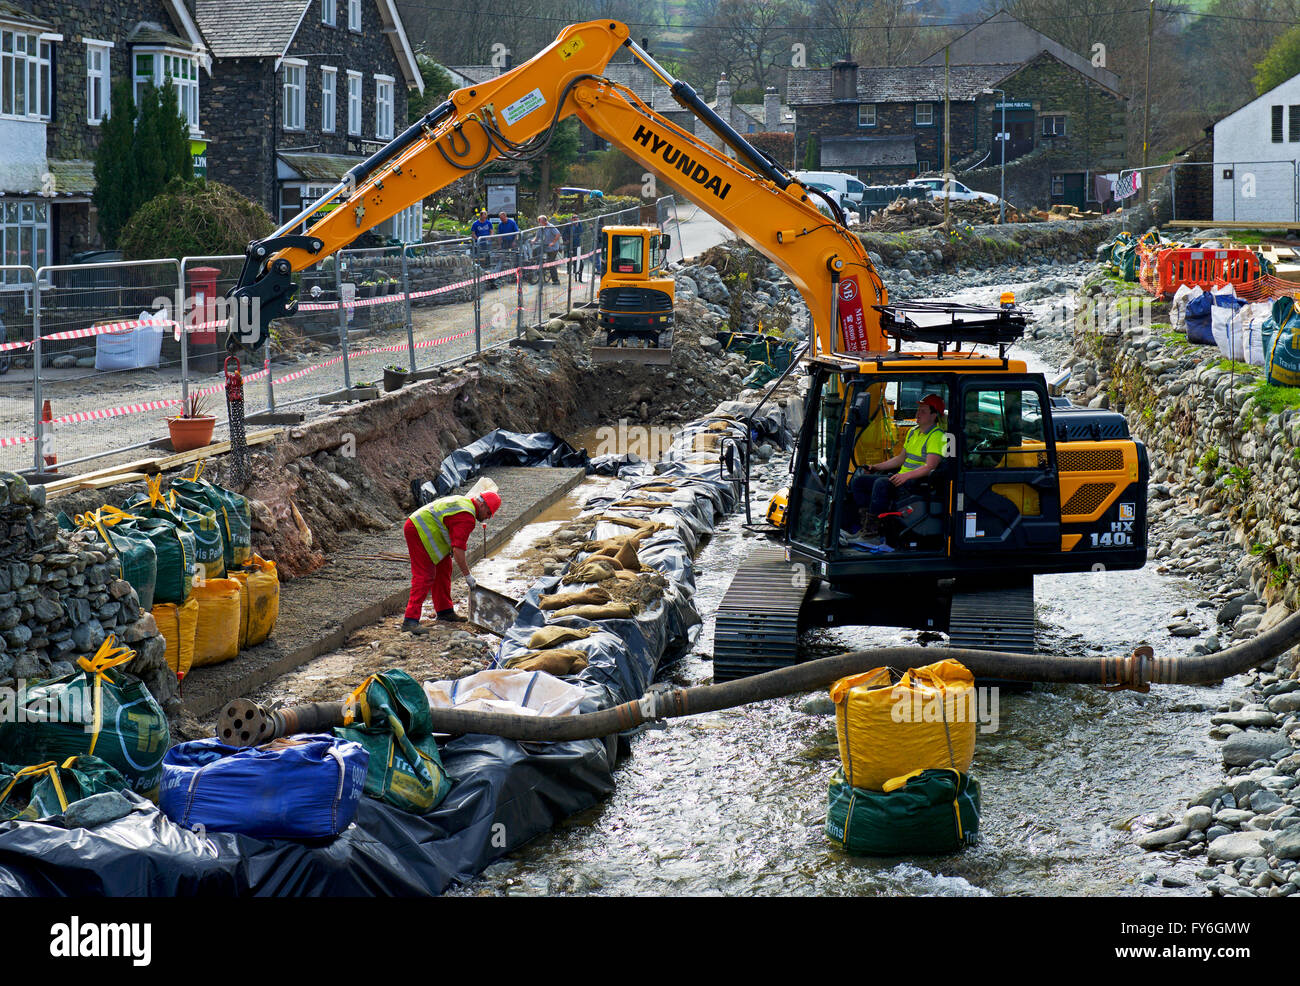 Remedial work being undertaken in the village of Glenridding, after floods in the winter of 2015/16, Lake District, Cumbria UK Stock Photo